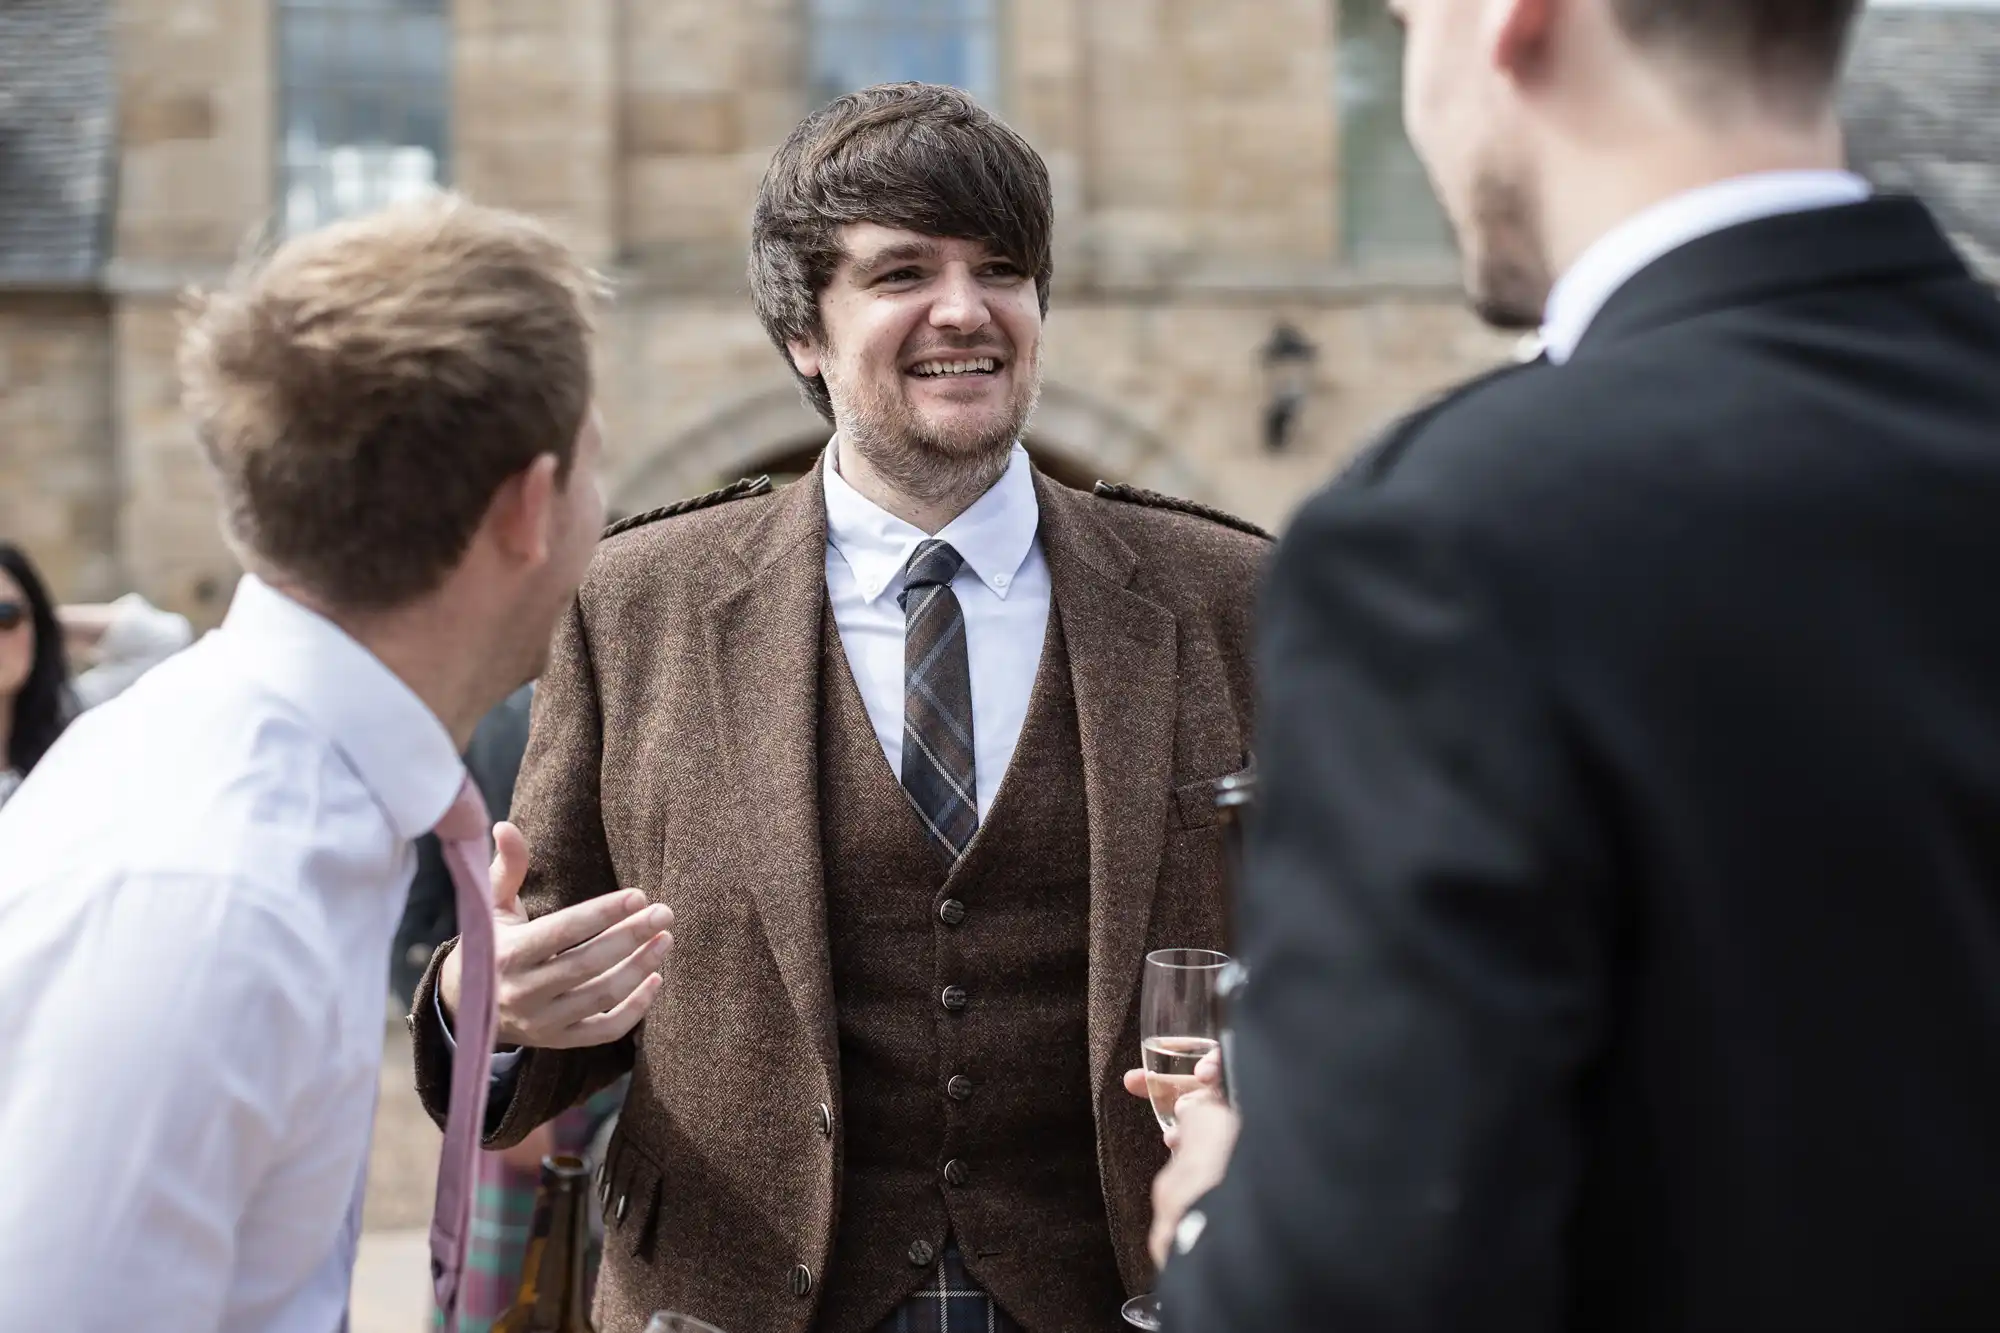 A man in a brown tweed jacket and tie laughs while chatting with two other men at an outdoor gathering.